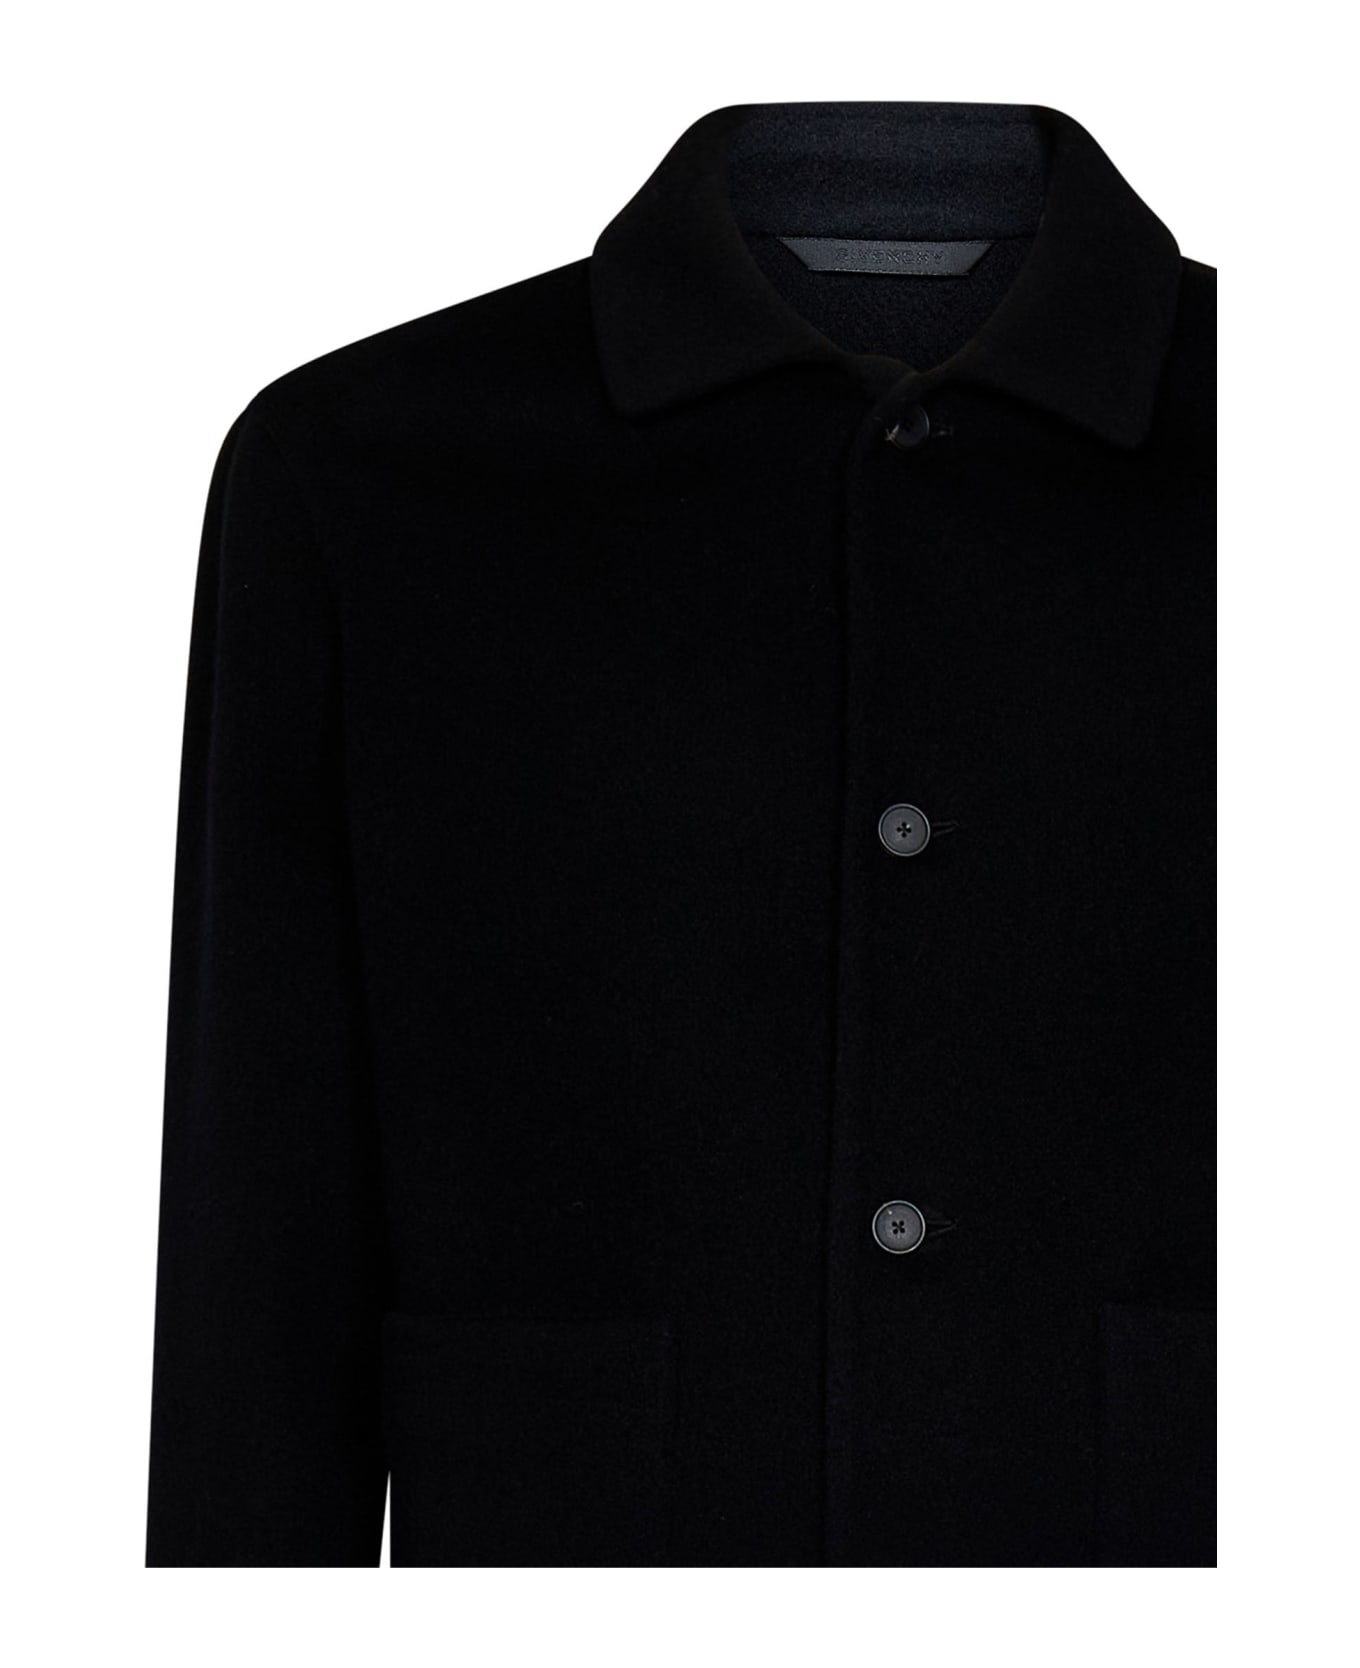 Givenchy Wool And Cashmere Jacket - black